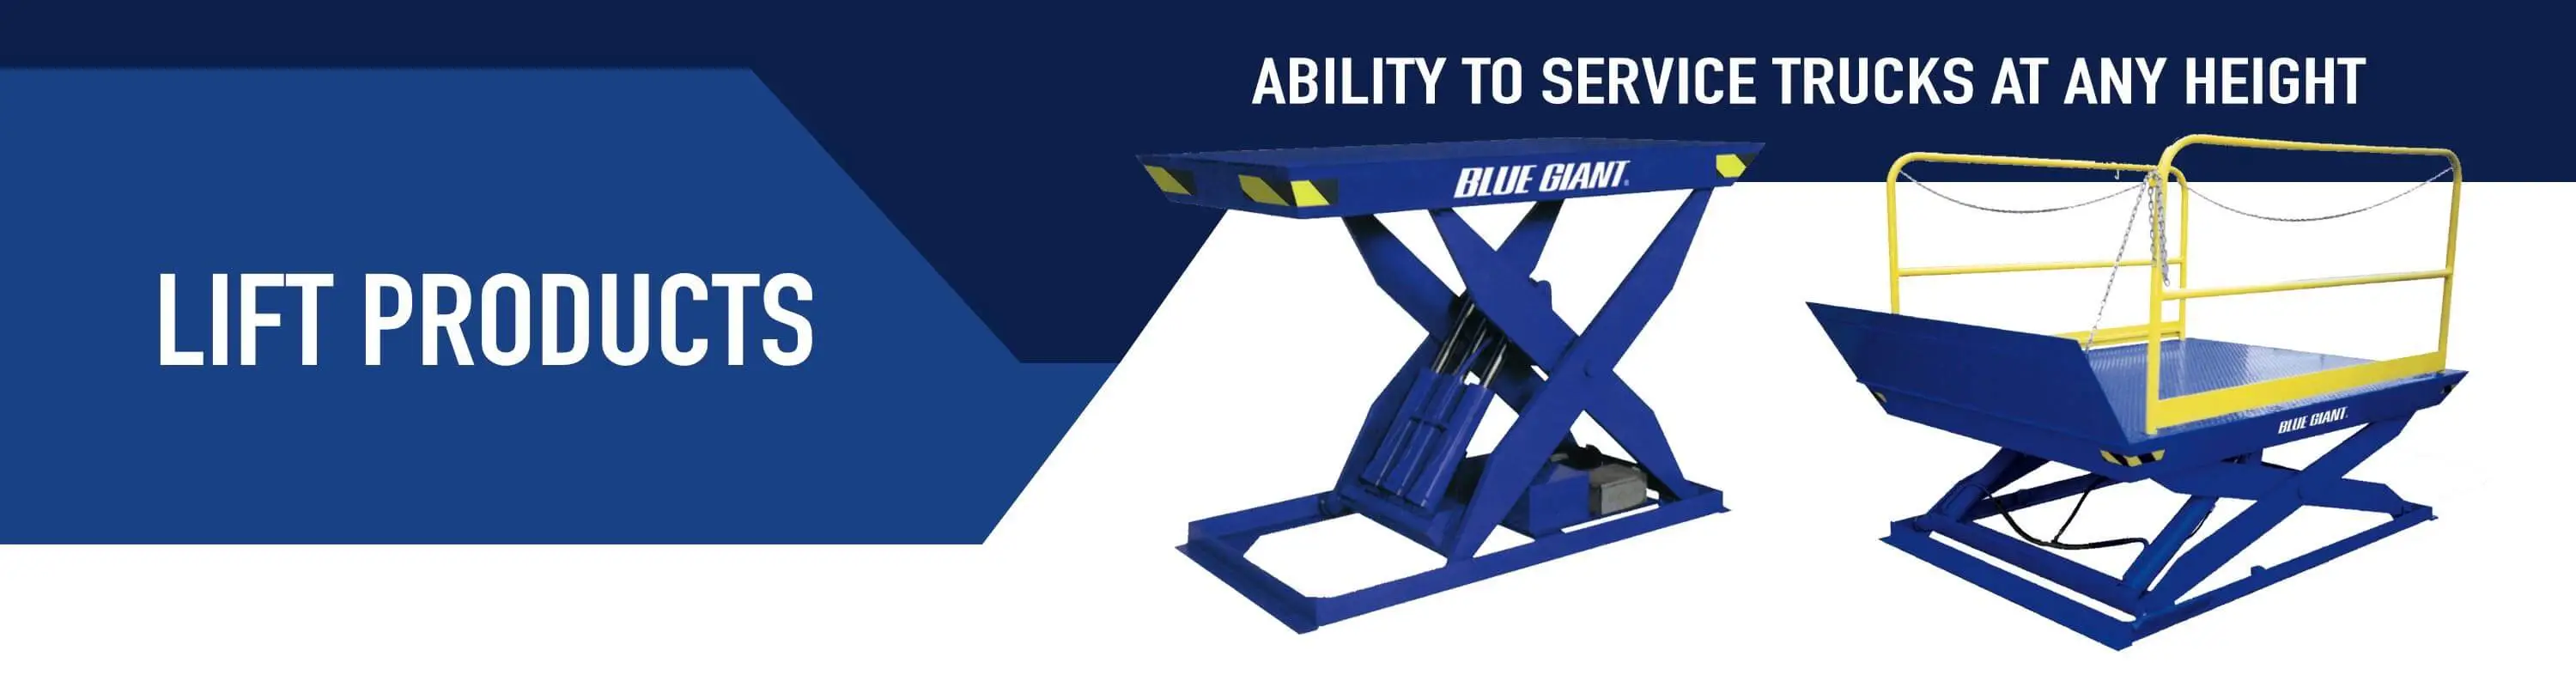 Blue-Giant-Lift-Products